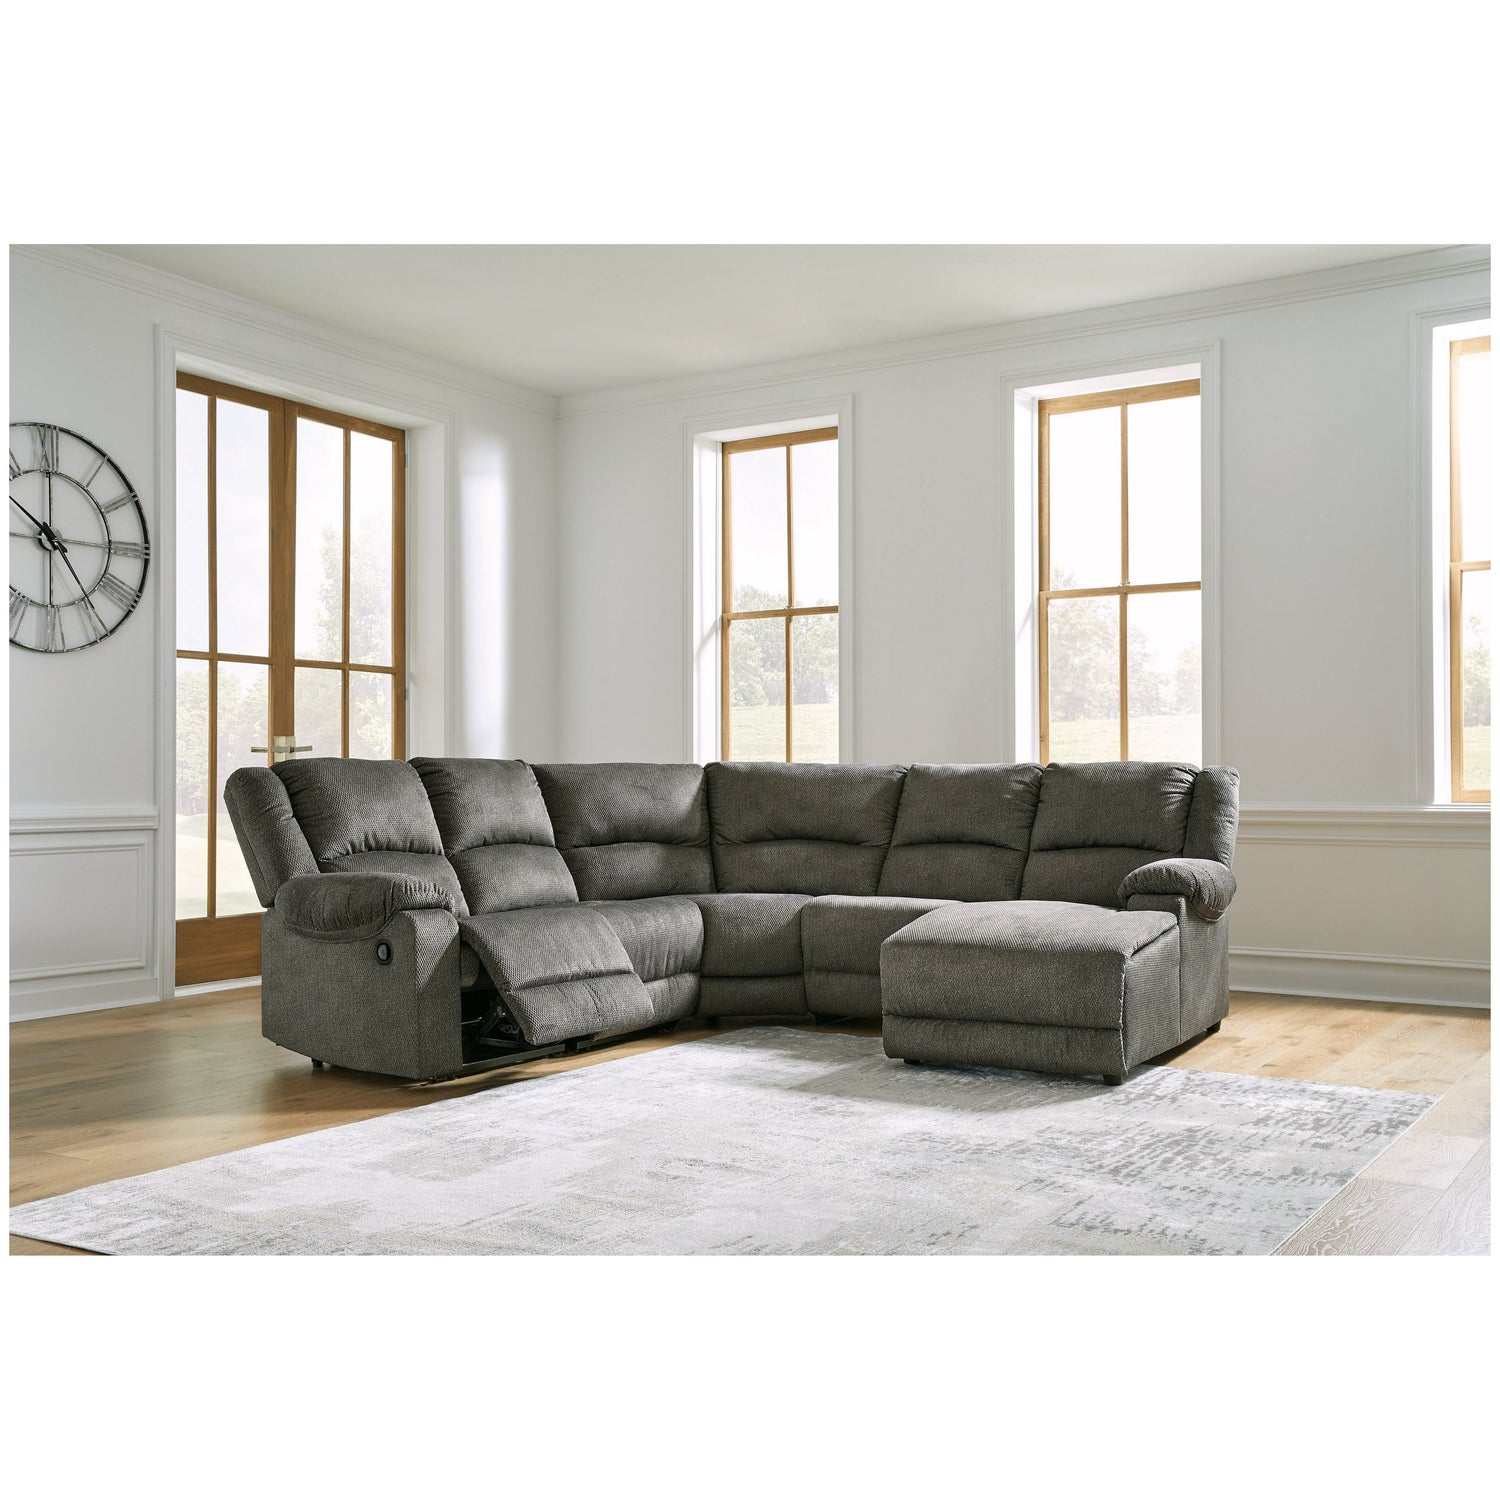 Benlocke 5-Piece Reclining Sectional with Chaise Ash-30402S10